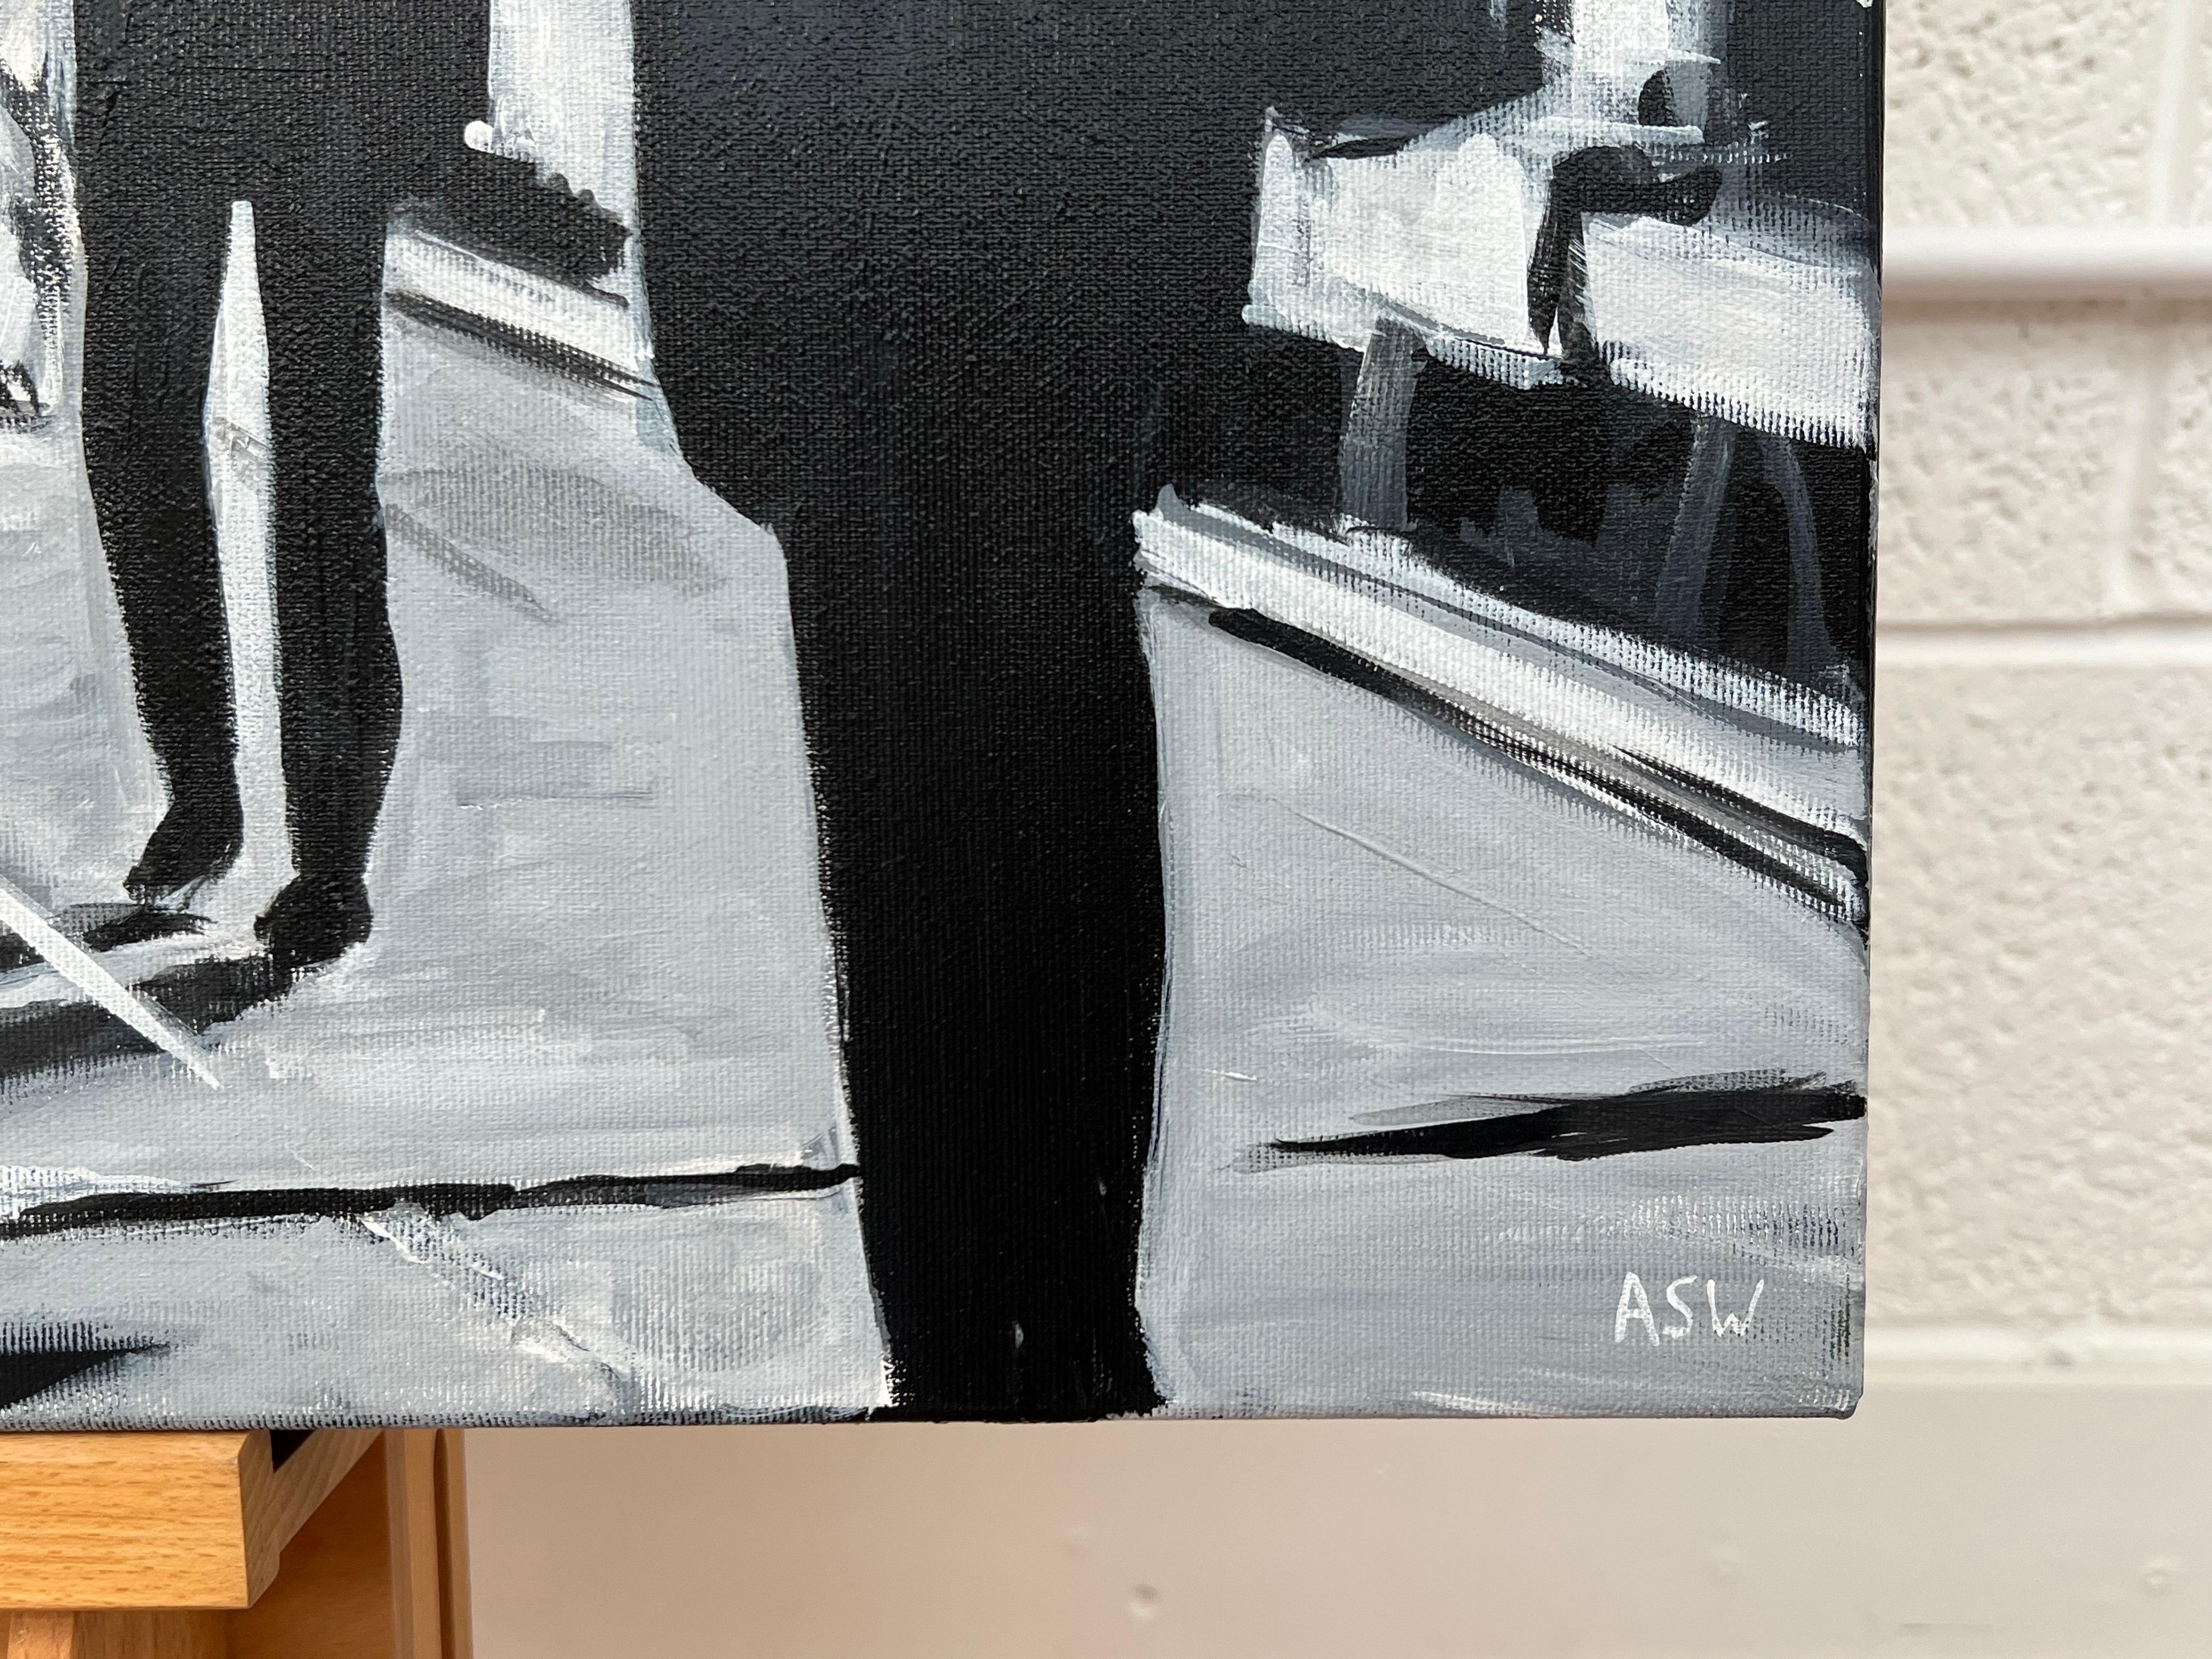 Black & White Painting of Hammersmith Bridge in London by British Urban Artist For Sale 2